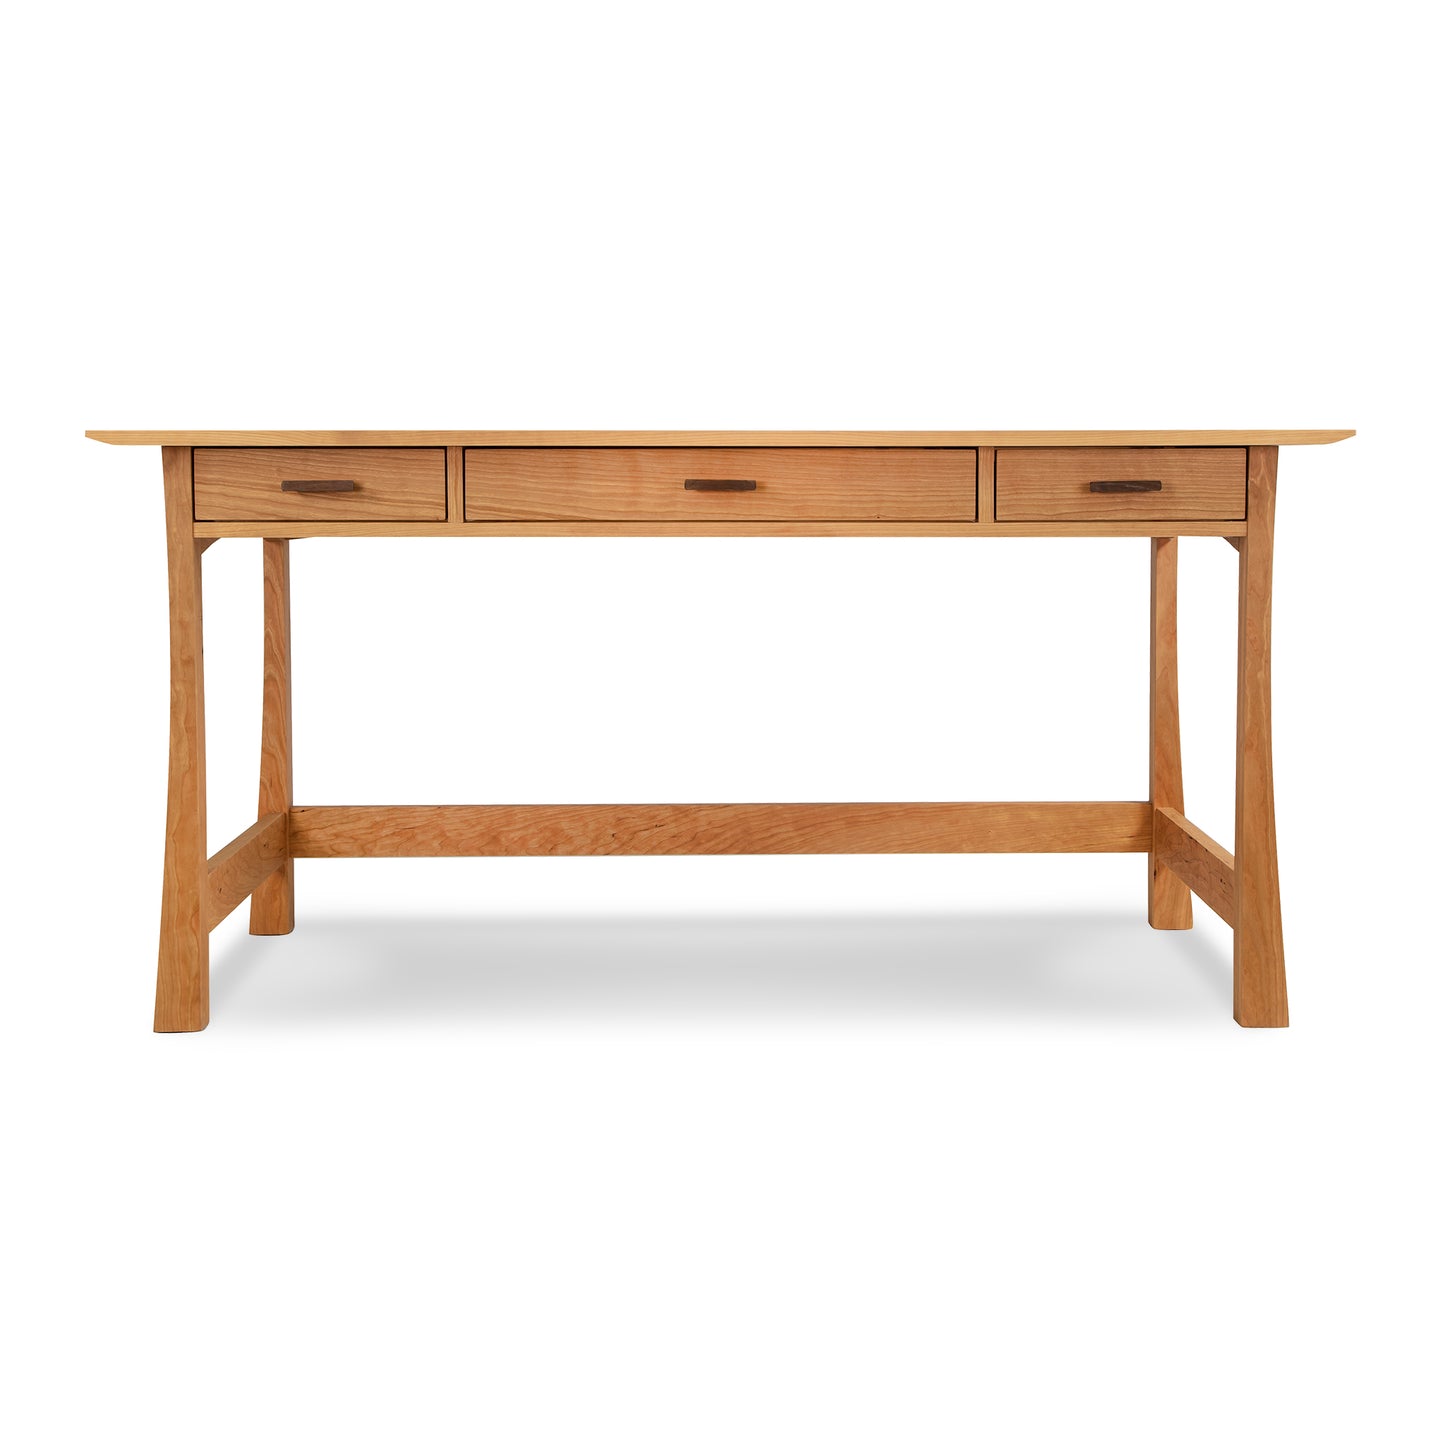 A solid Cherry Contemporary Craftsman Library Desk by Vermont Furniture Designs, featuring a clear finish, with three drawers and tapered legs, isolated on a white background.